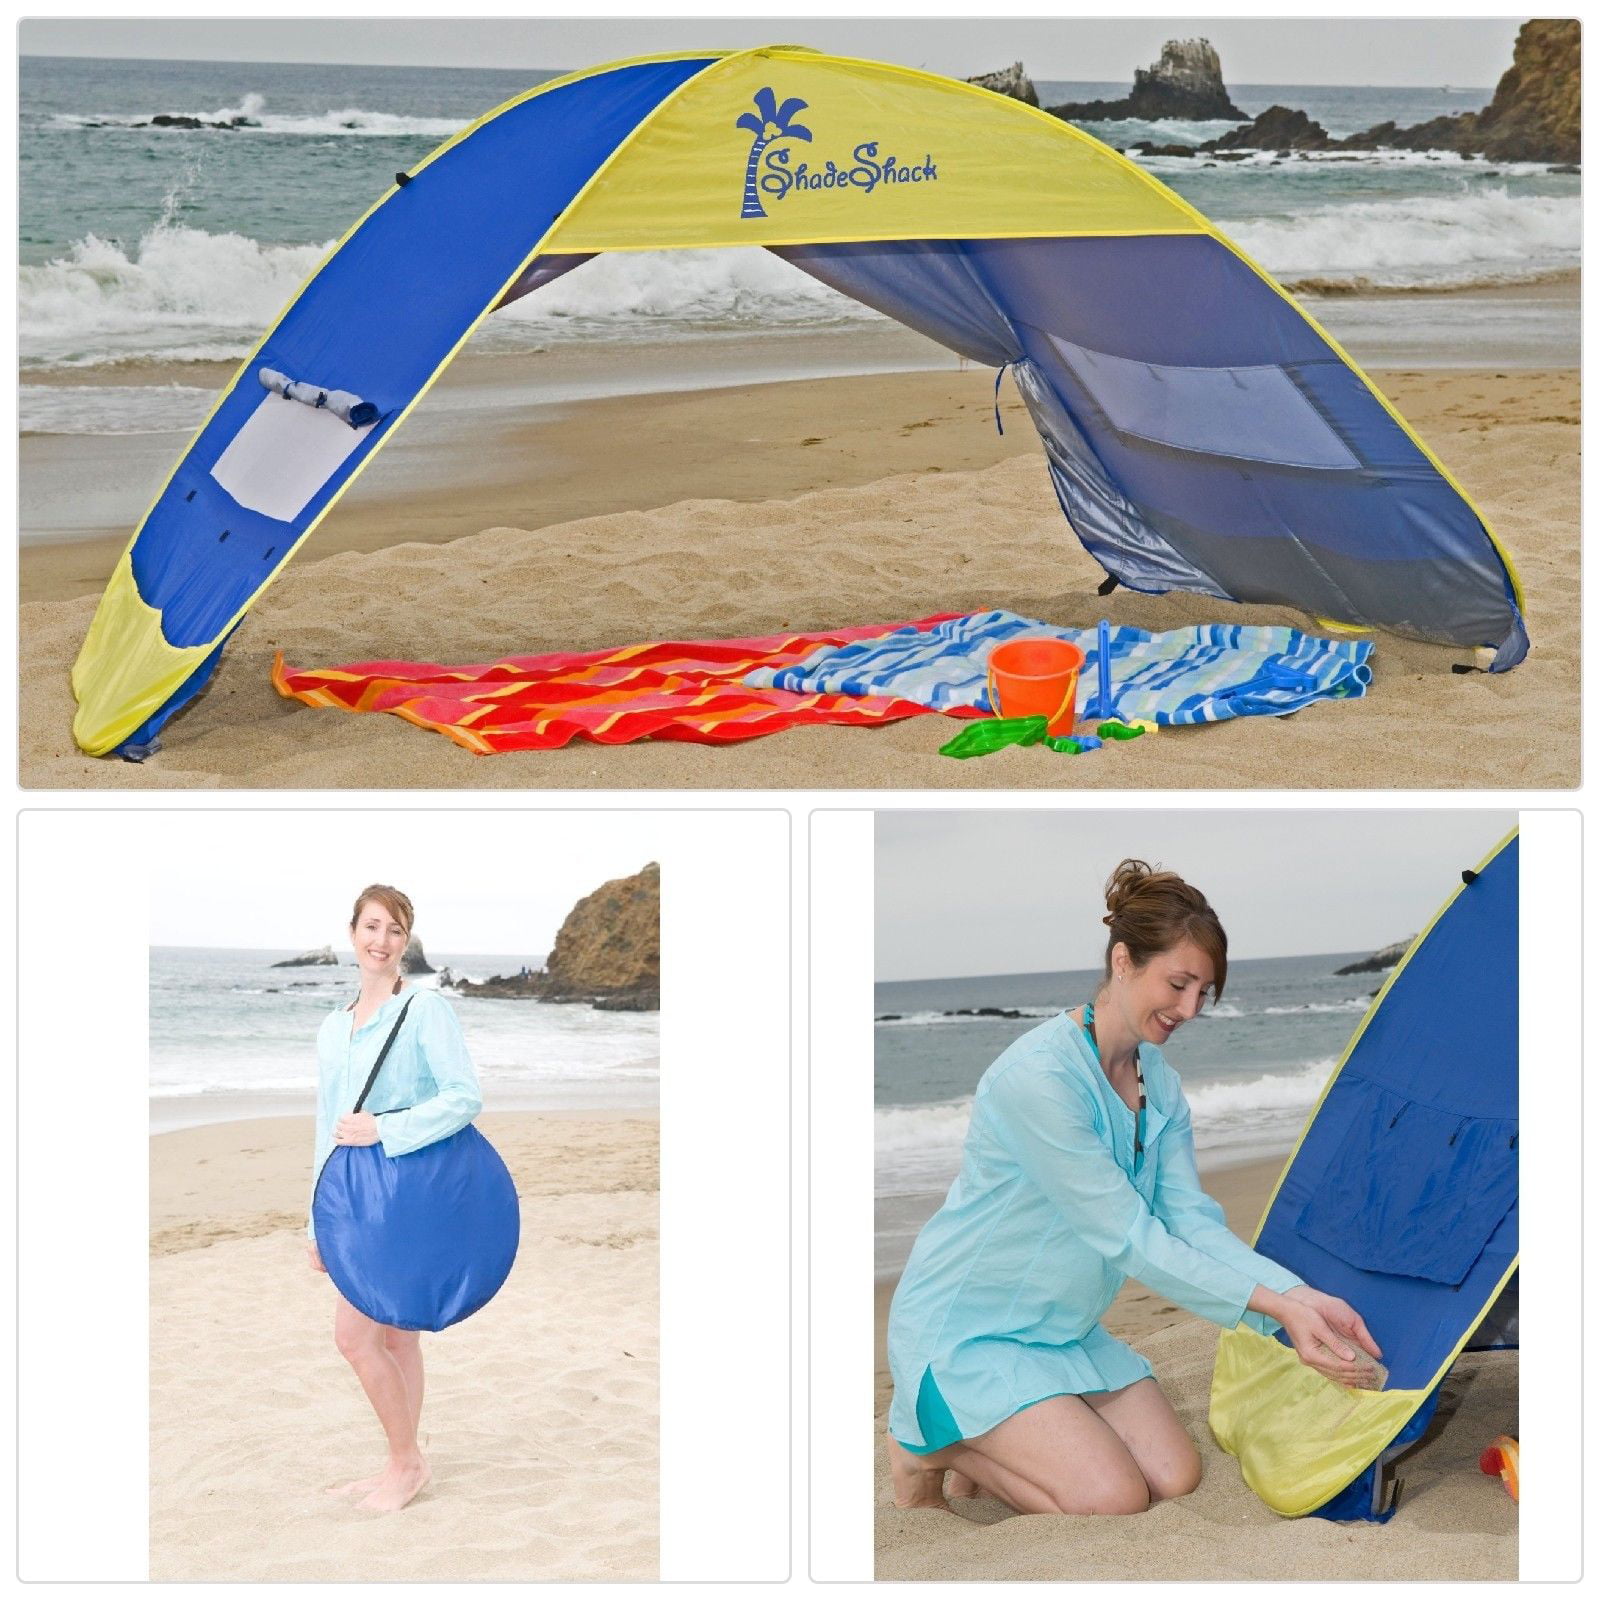 Shade Shack Beach Tent Easy Automatic Instant Pop Up Sun Shelter